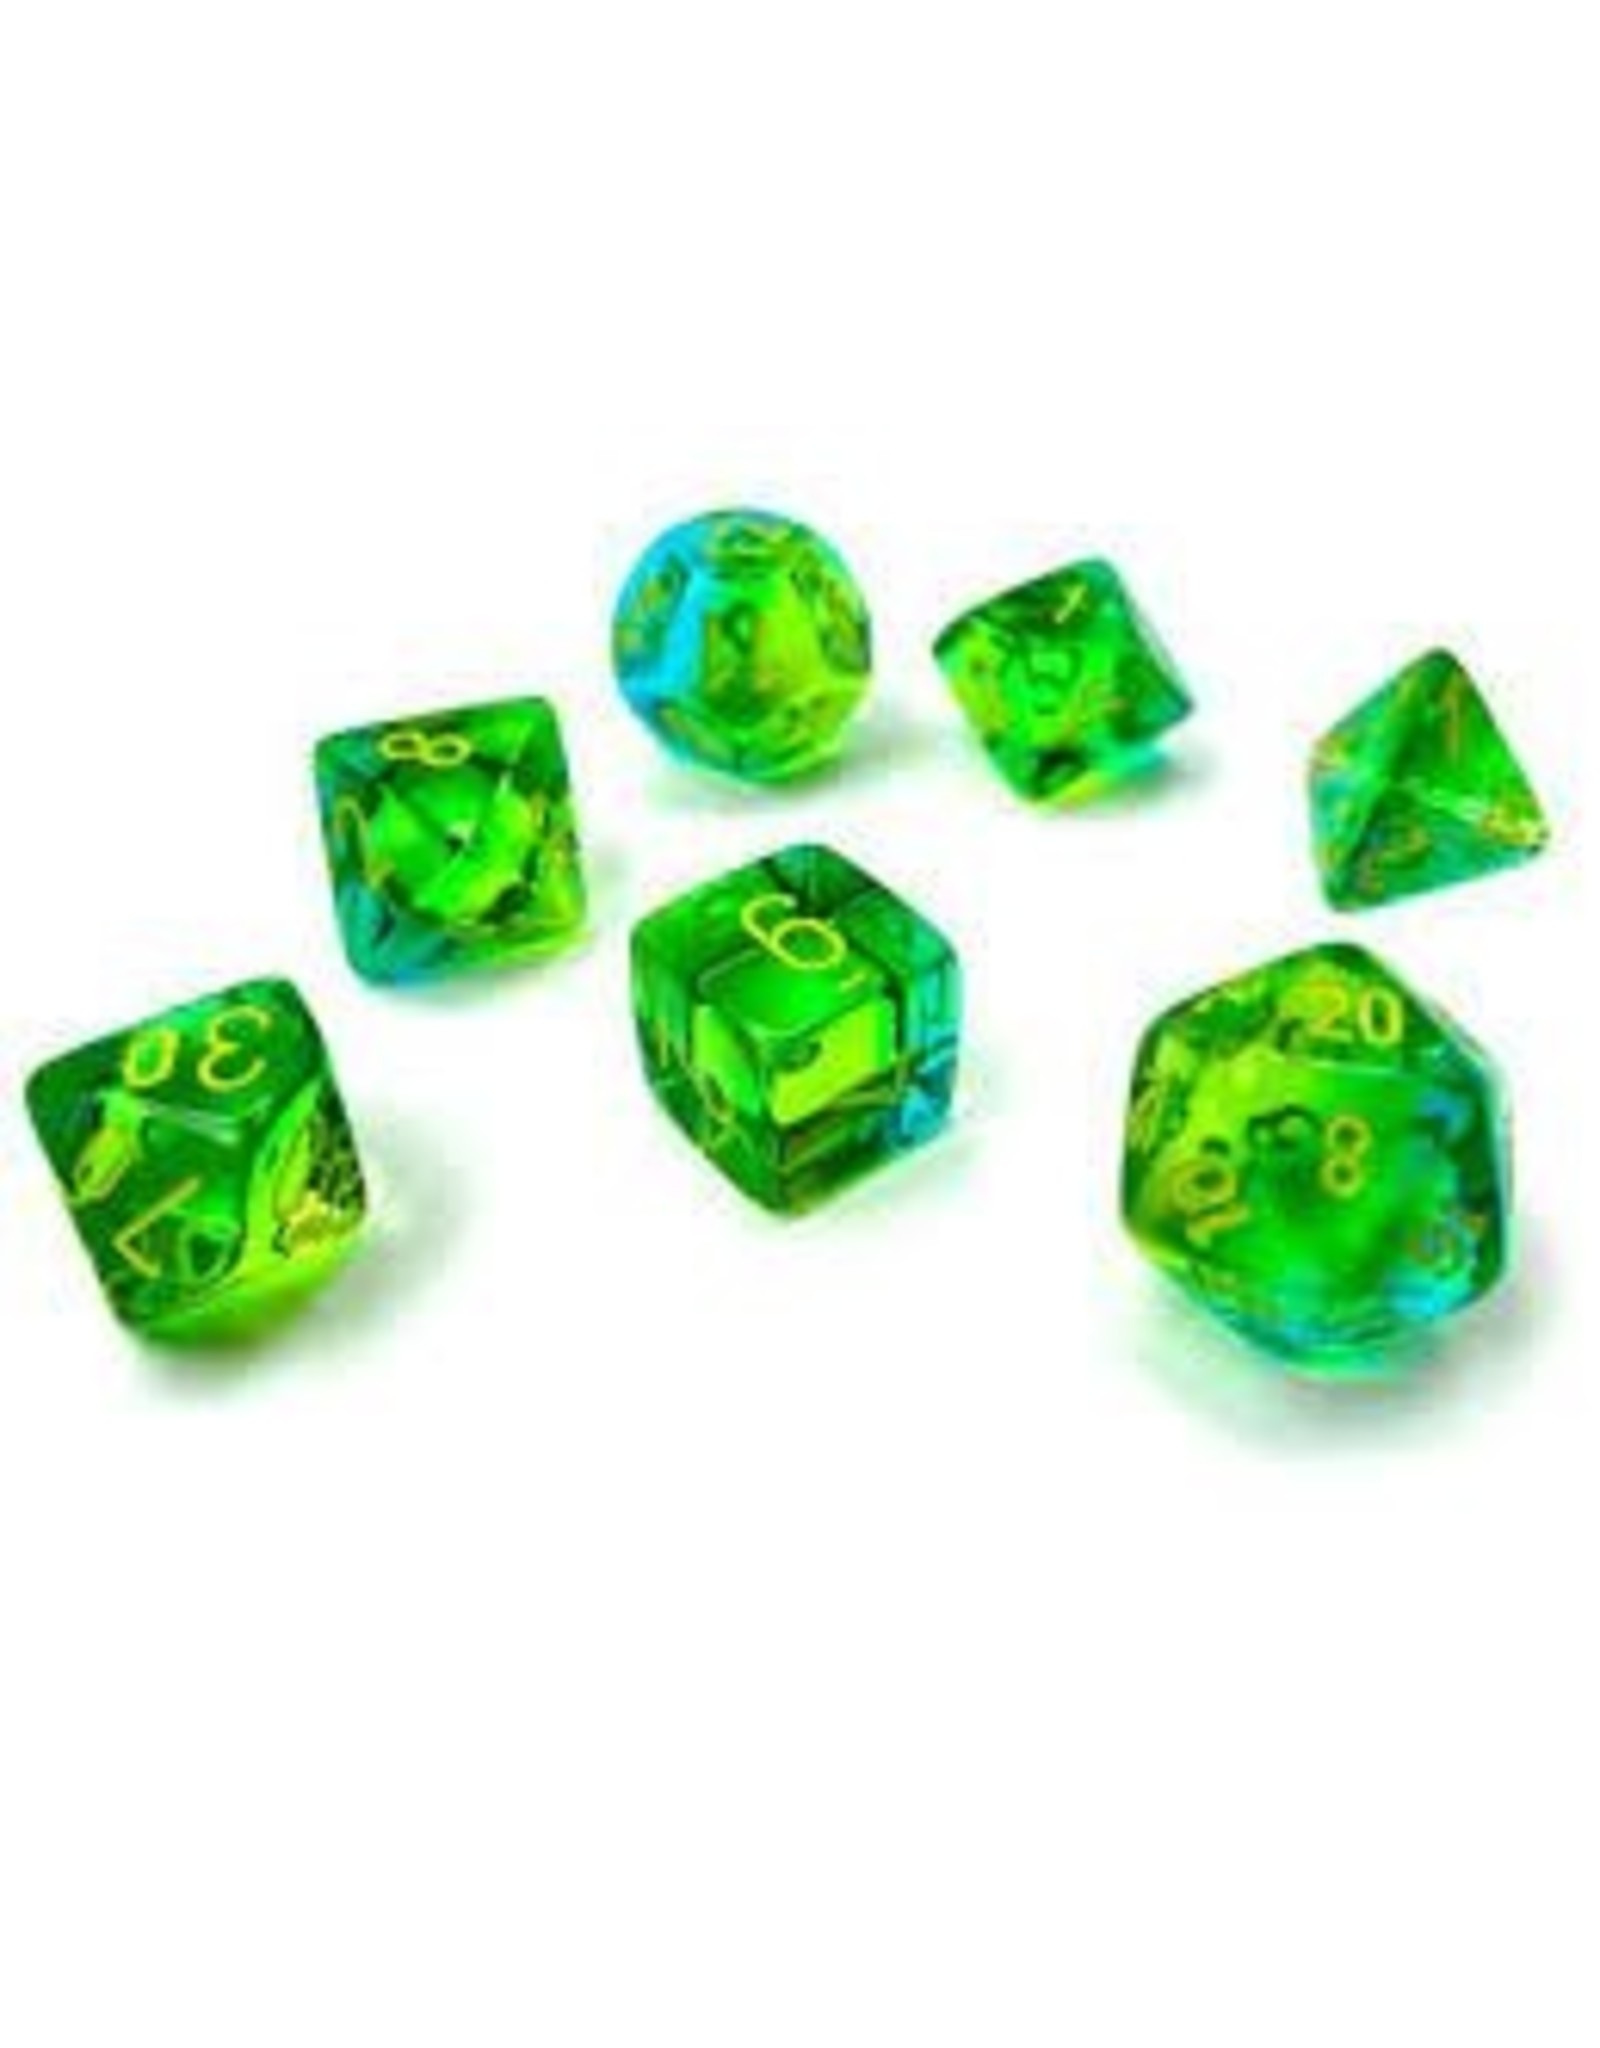 Chessex 7-Set Cube Gemini Translucent Green-Teal with Yellow